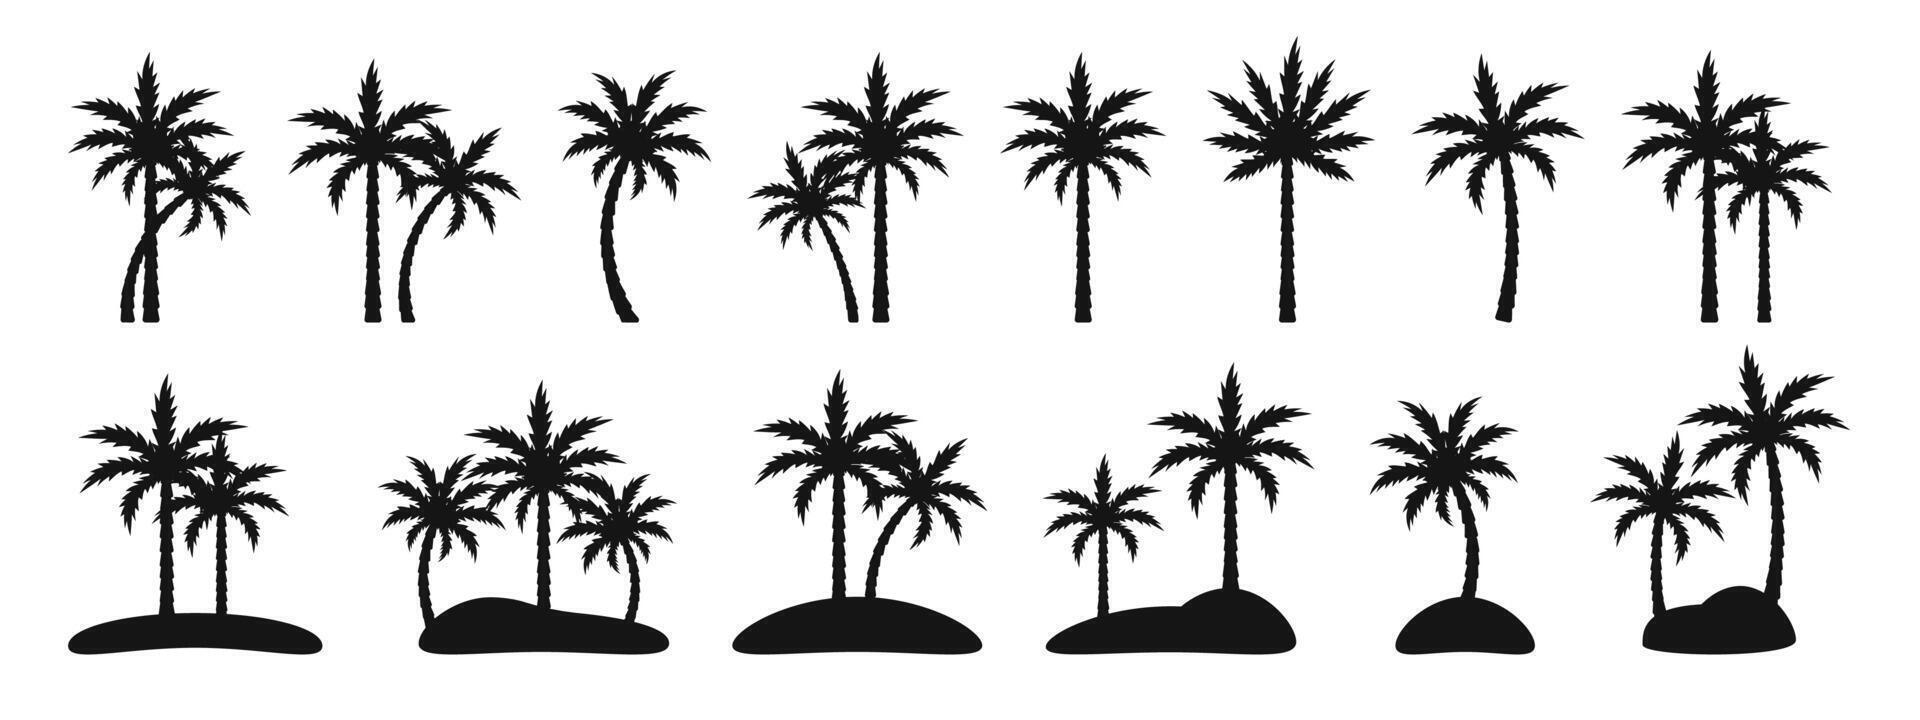 Palm tree icon set. Palm silhouettes. Palm trees collection. Tropical palm trees silhouettes illustration vector